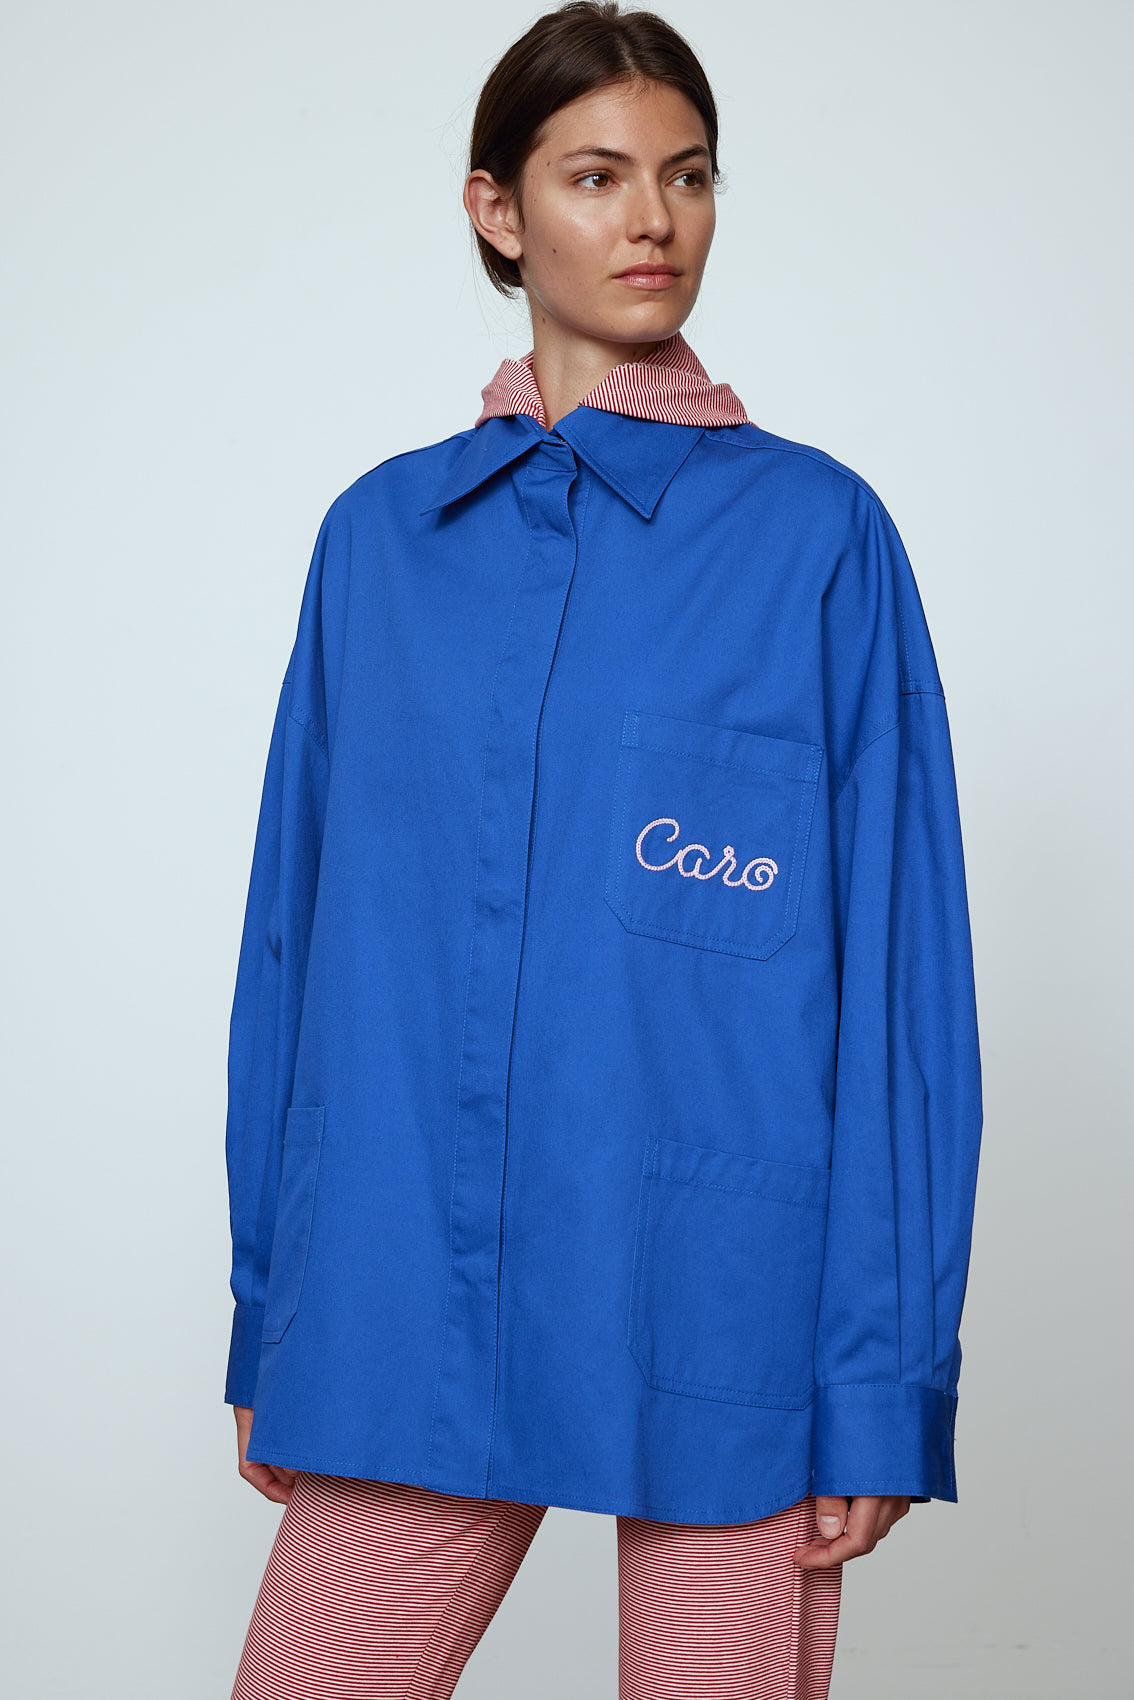 The Frederik Shirt is an oversized cotton style with big sleeves and an embroidered Caro logo on the front.  Style it open over a dress, tank top, or t-shirt or buttoned up on its own.  Material: 100% cotton.  The model is 179cm (5'10") and wears size S. Inspired by Frederik Bille Brahe. 